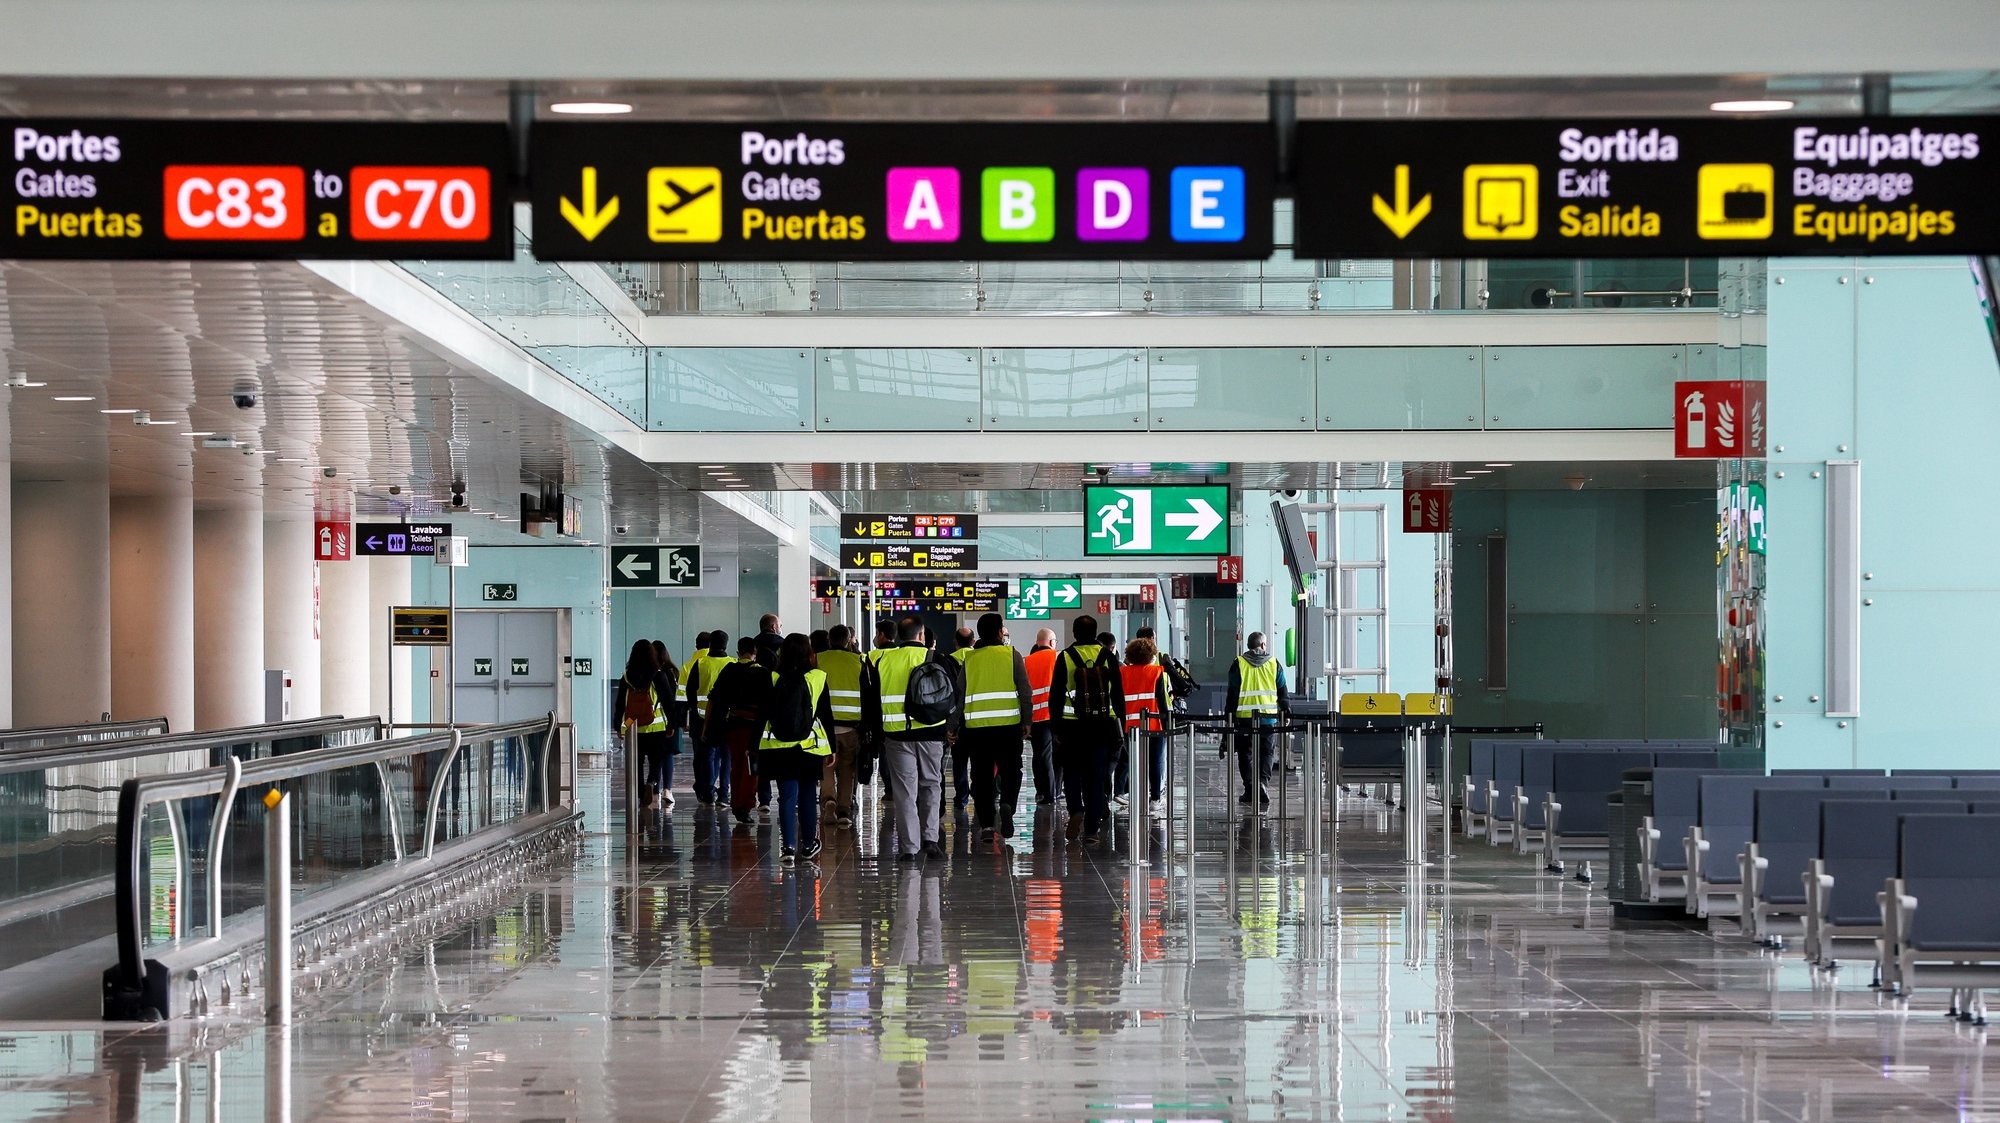 epa09165160 View of the access to the southern gates of Terminal 1 in El Prat airport in Barcelona, Spain, 28 April 2021. El Prat airport has presented renovation works that started back in 2018 and that have had a 48-million-euro budget.  EPA/QUIQUE GARCIA